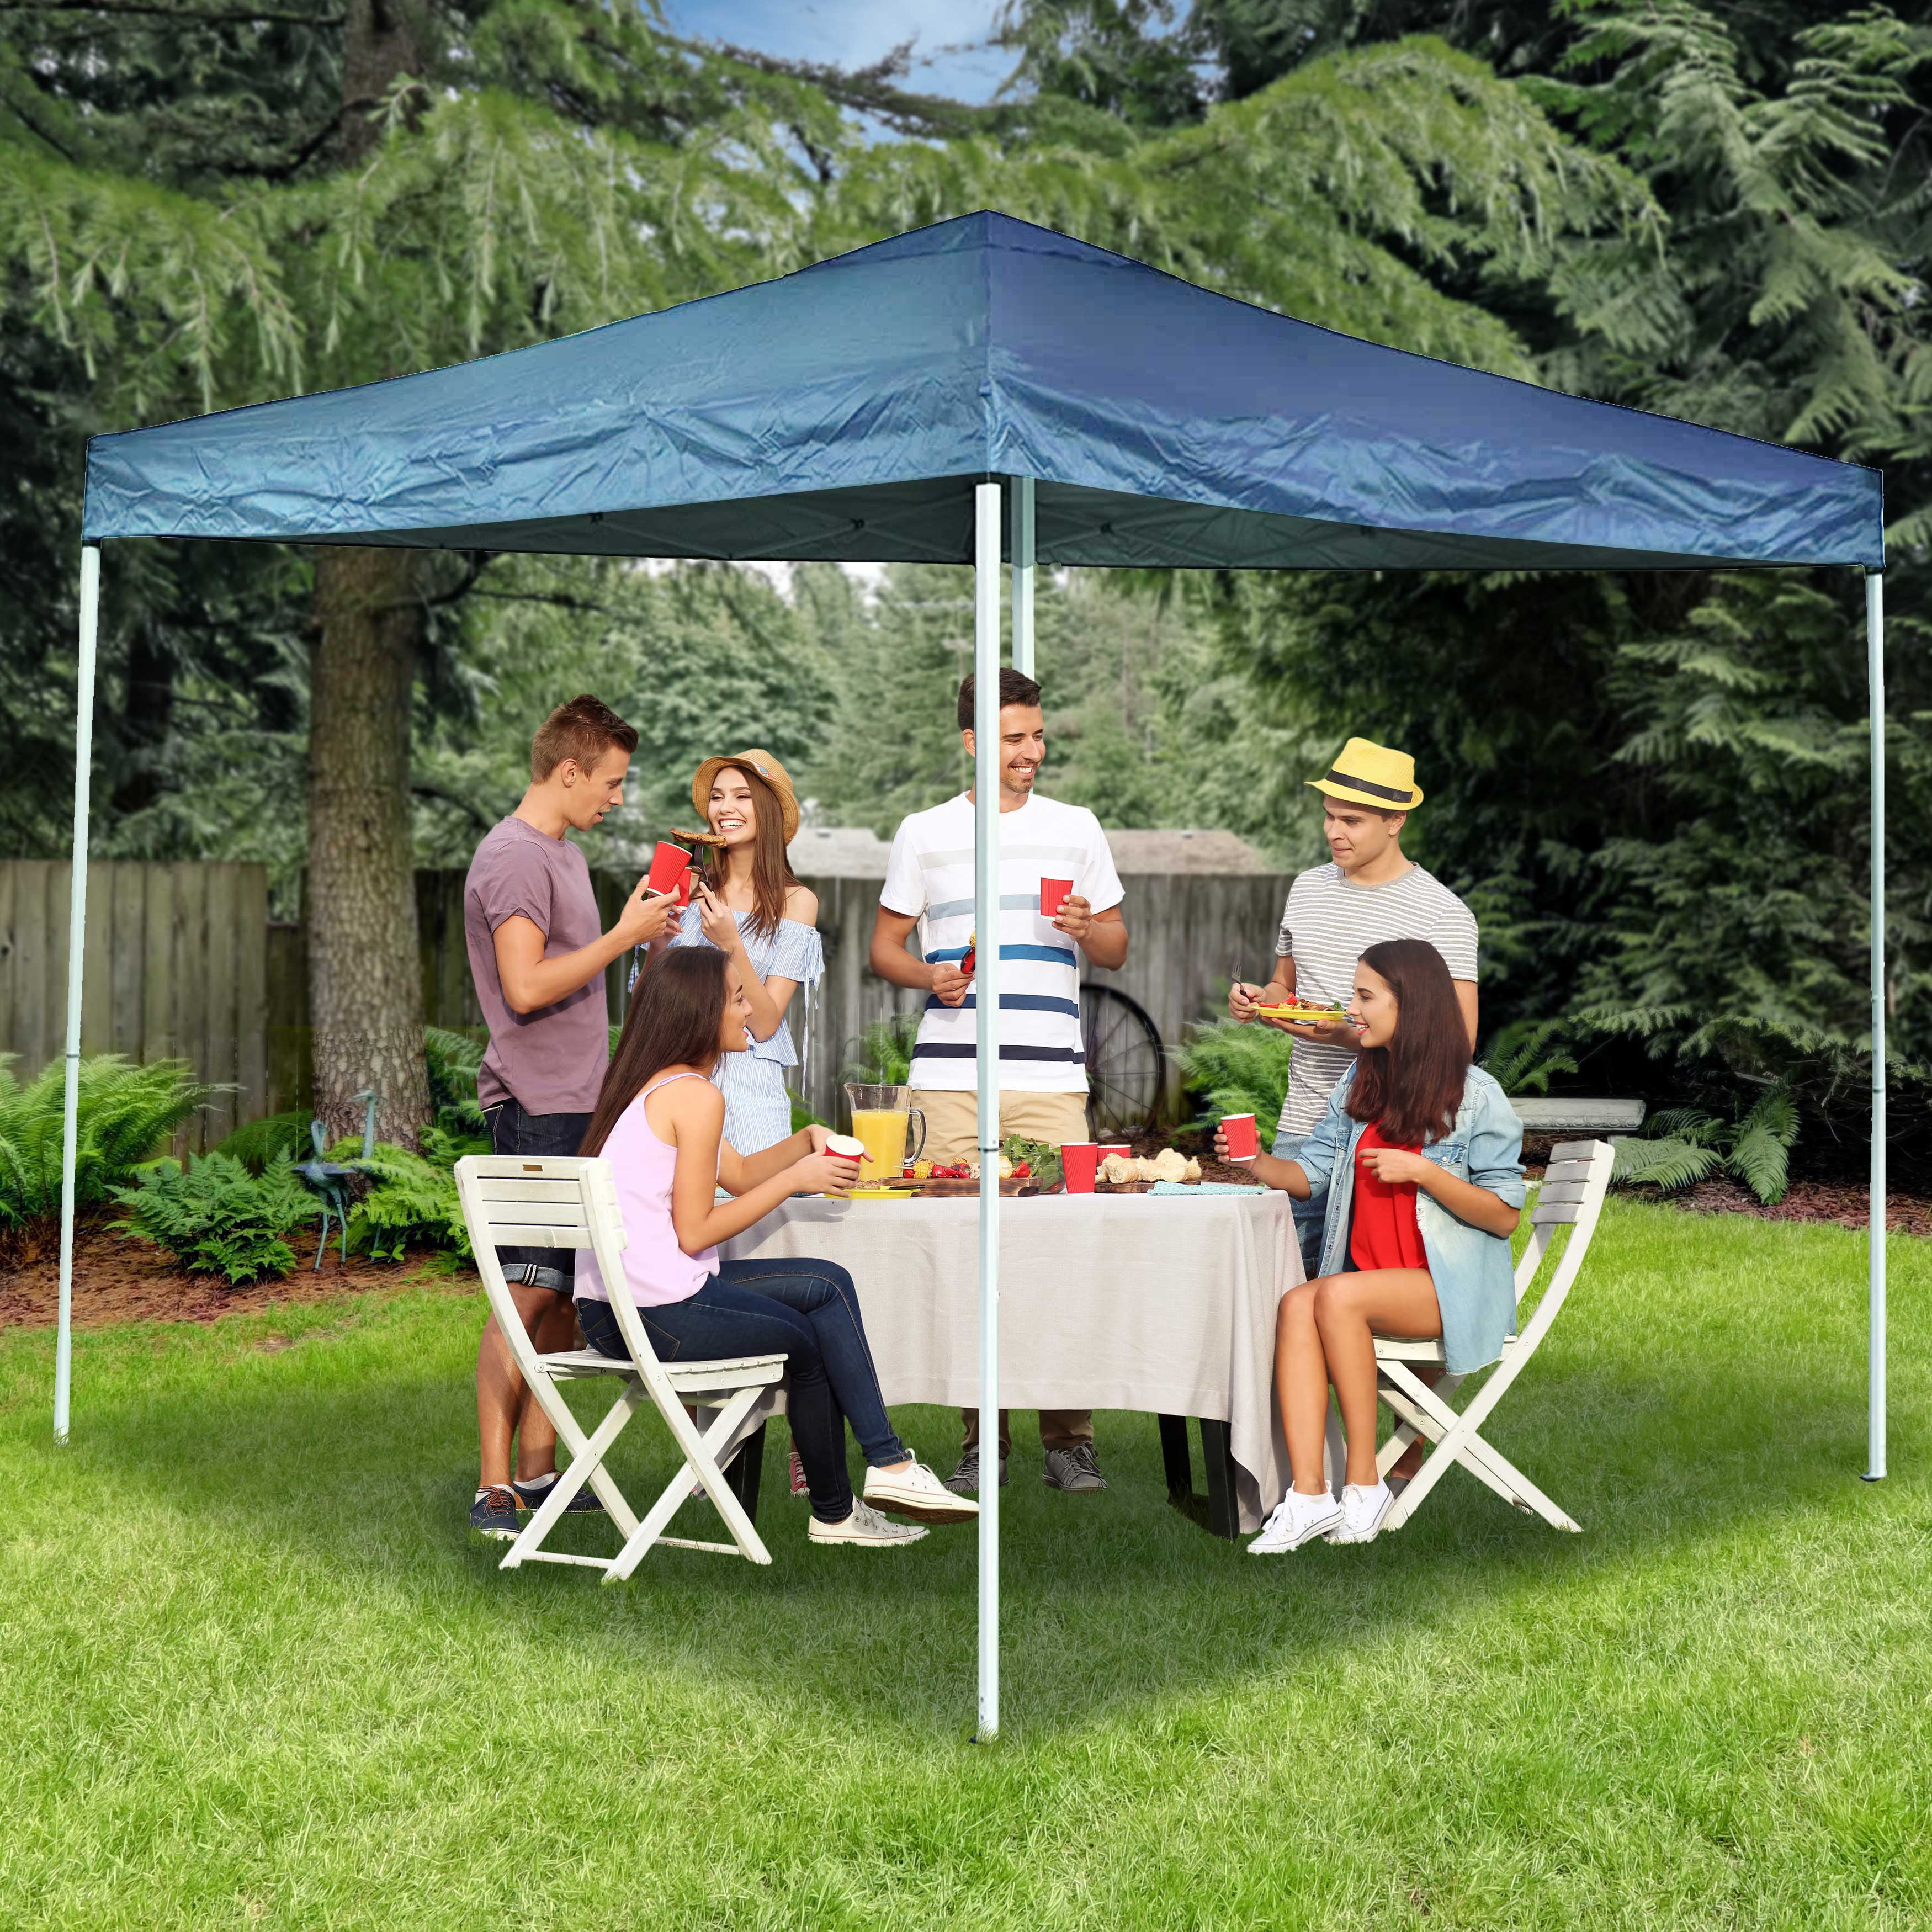 ALEKO Waterproof Gazebo Tent Canopy For Outdoor Events Picnic Party White Color